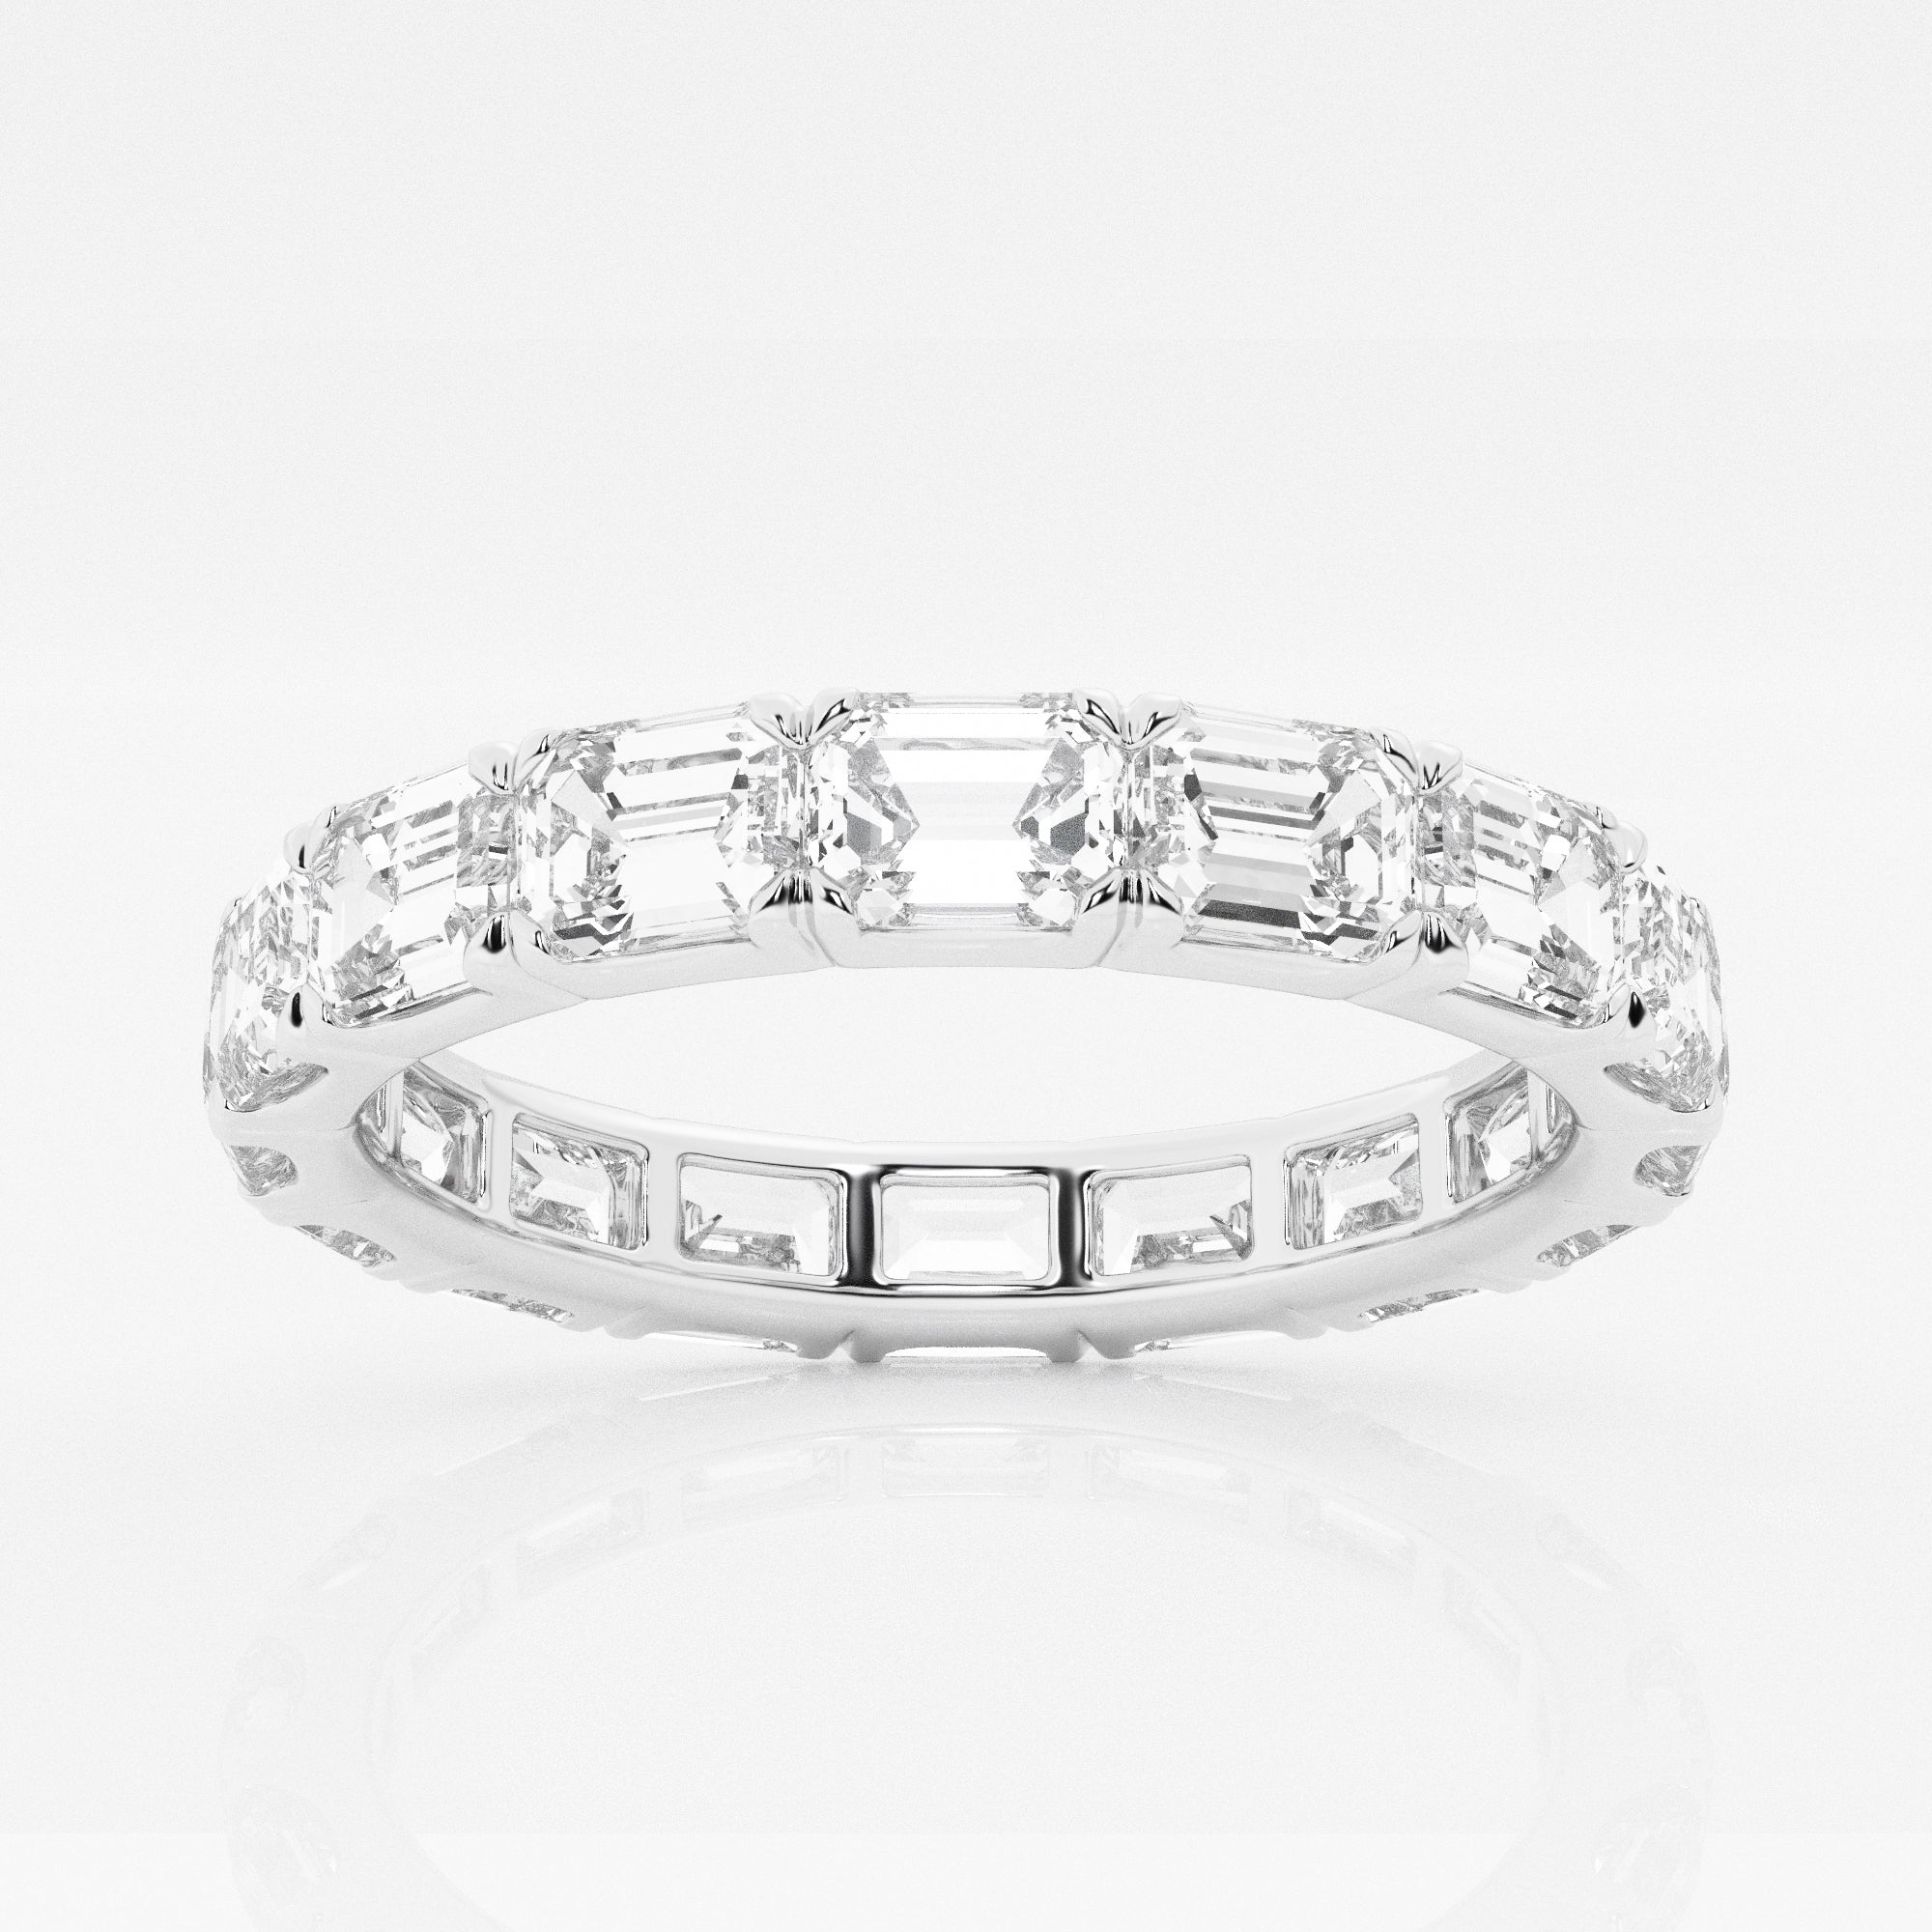 14kt white gold/4/4.25/4.5/4.75/ 5/5.25/5.5/5.75/6/6.25/6.5/6.75/7/7.25/7.5/ 7.75/8/8.25/8.5/8.75/9/top